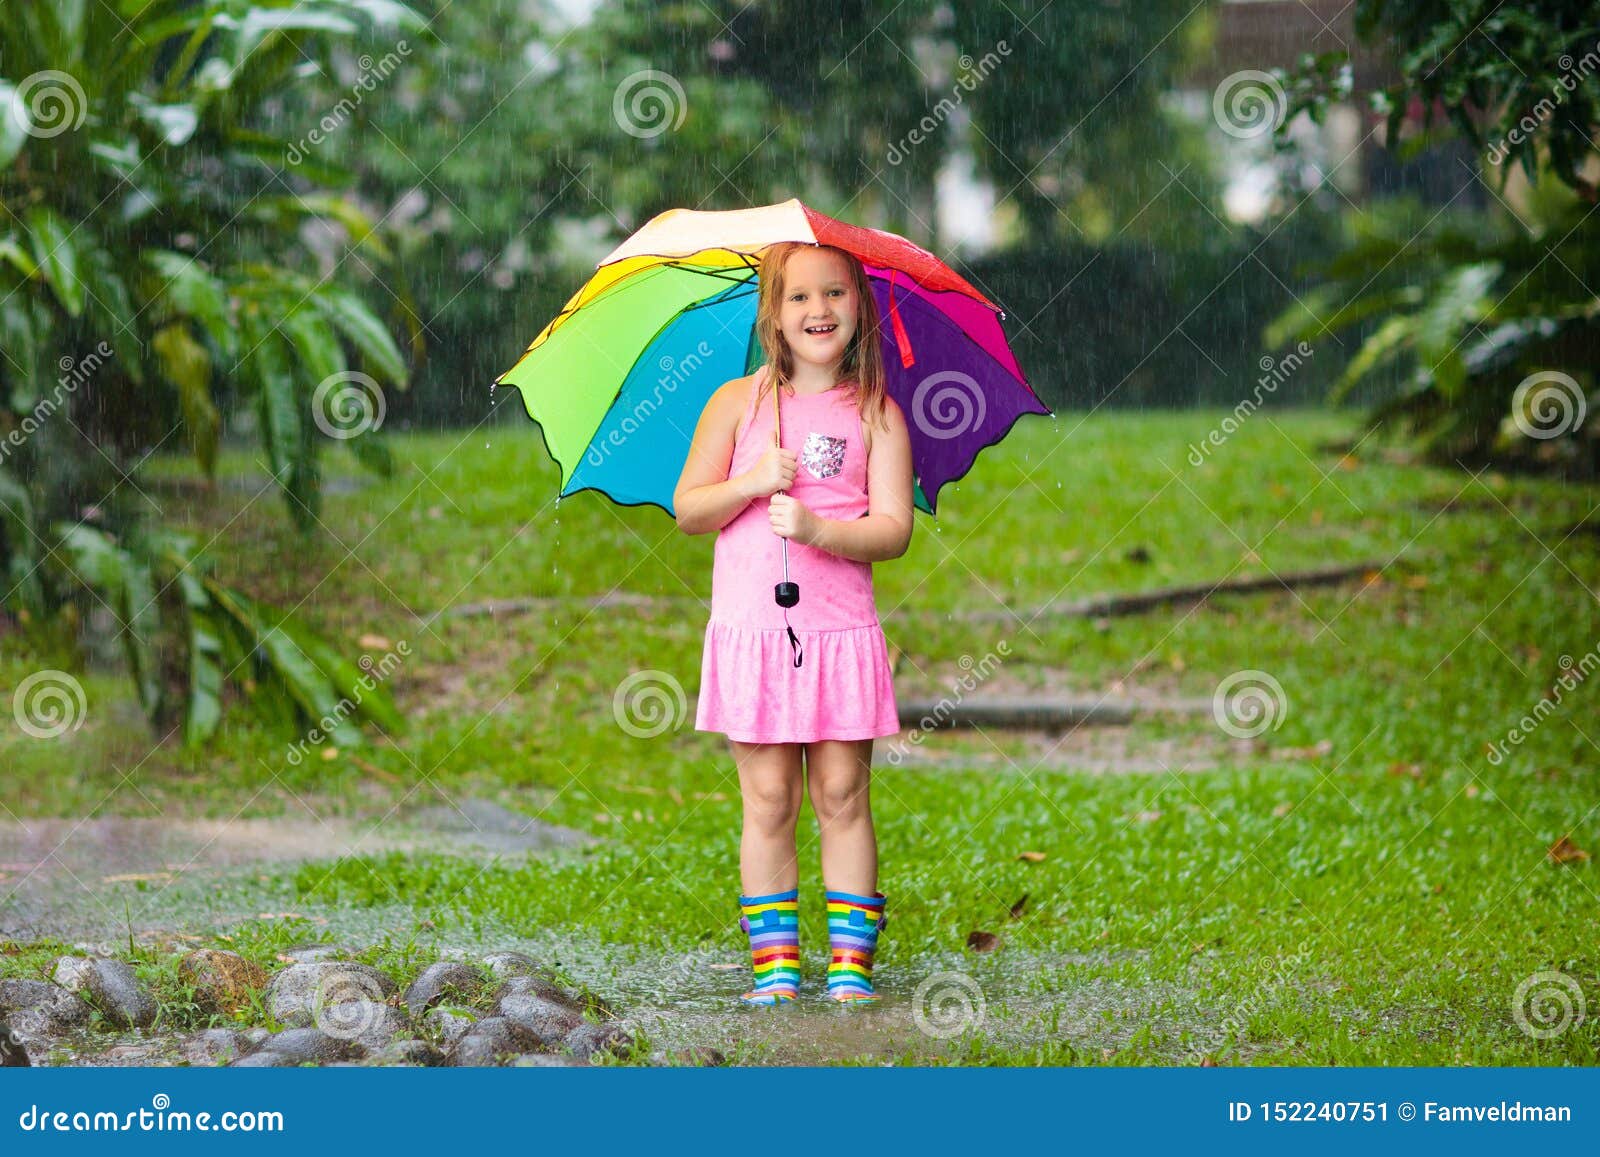 Kid with Umbrella Playing in Summer Rain Stock Image - Image of dance,  fall: 152240751